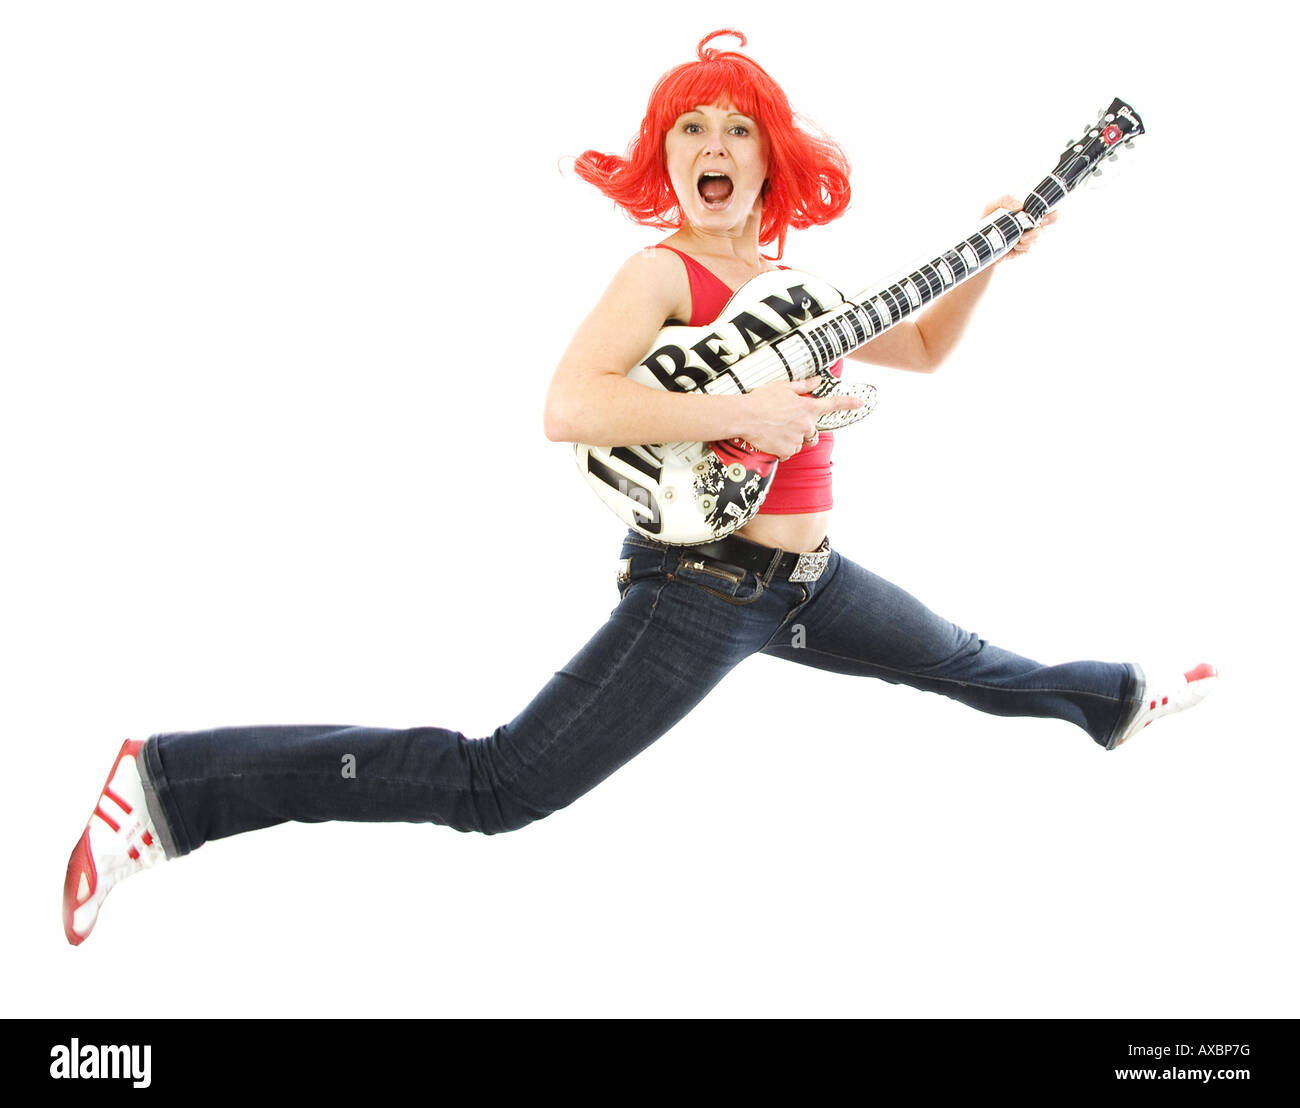 young woman with a red wig playing air guitar Stock Photo